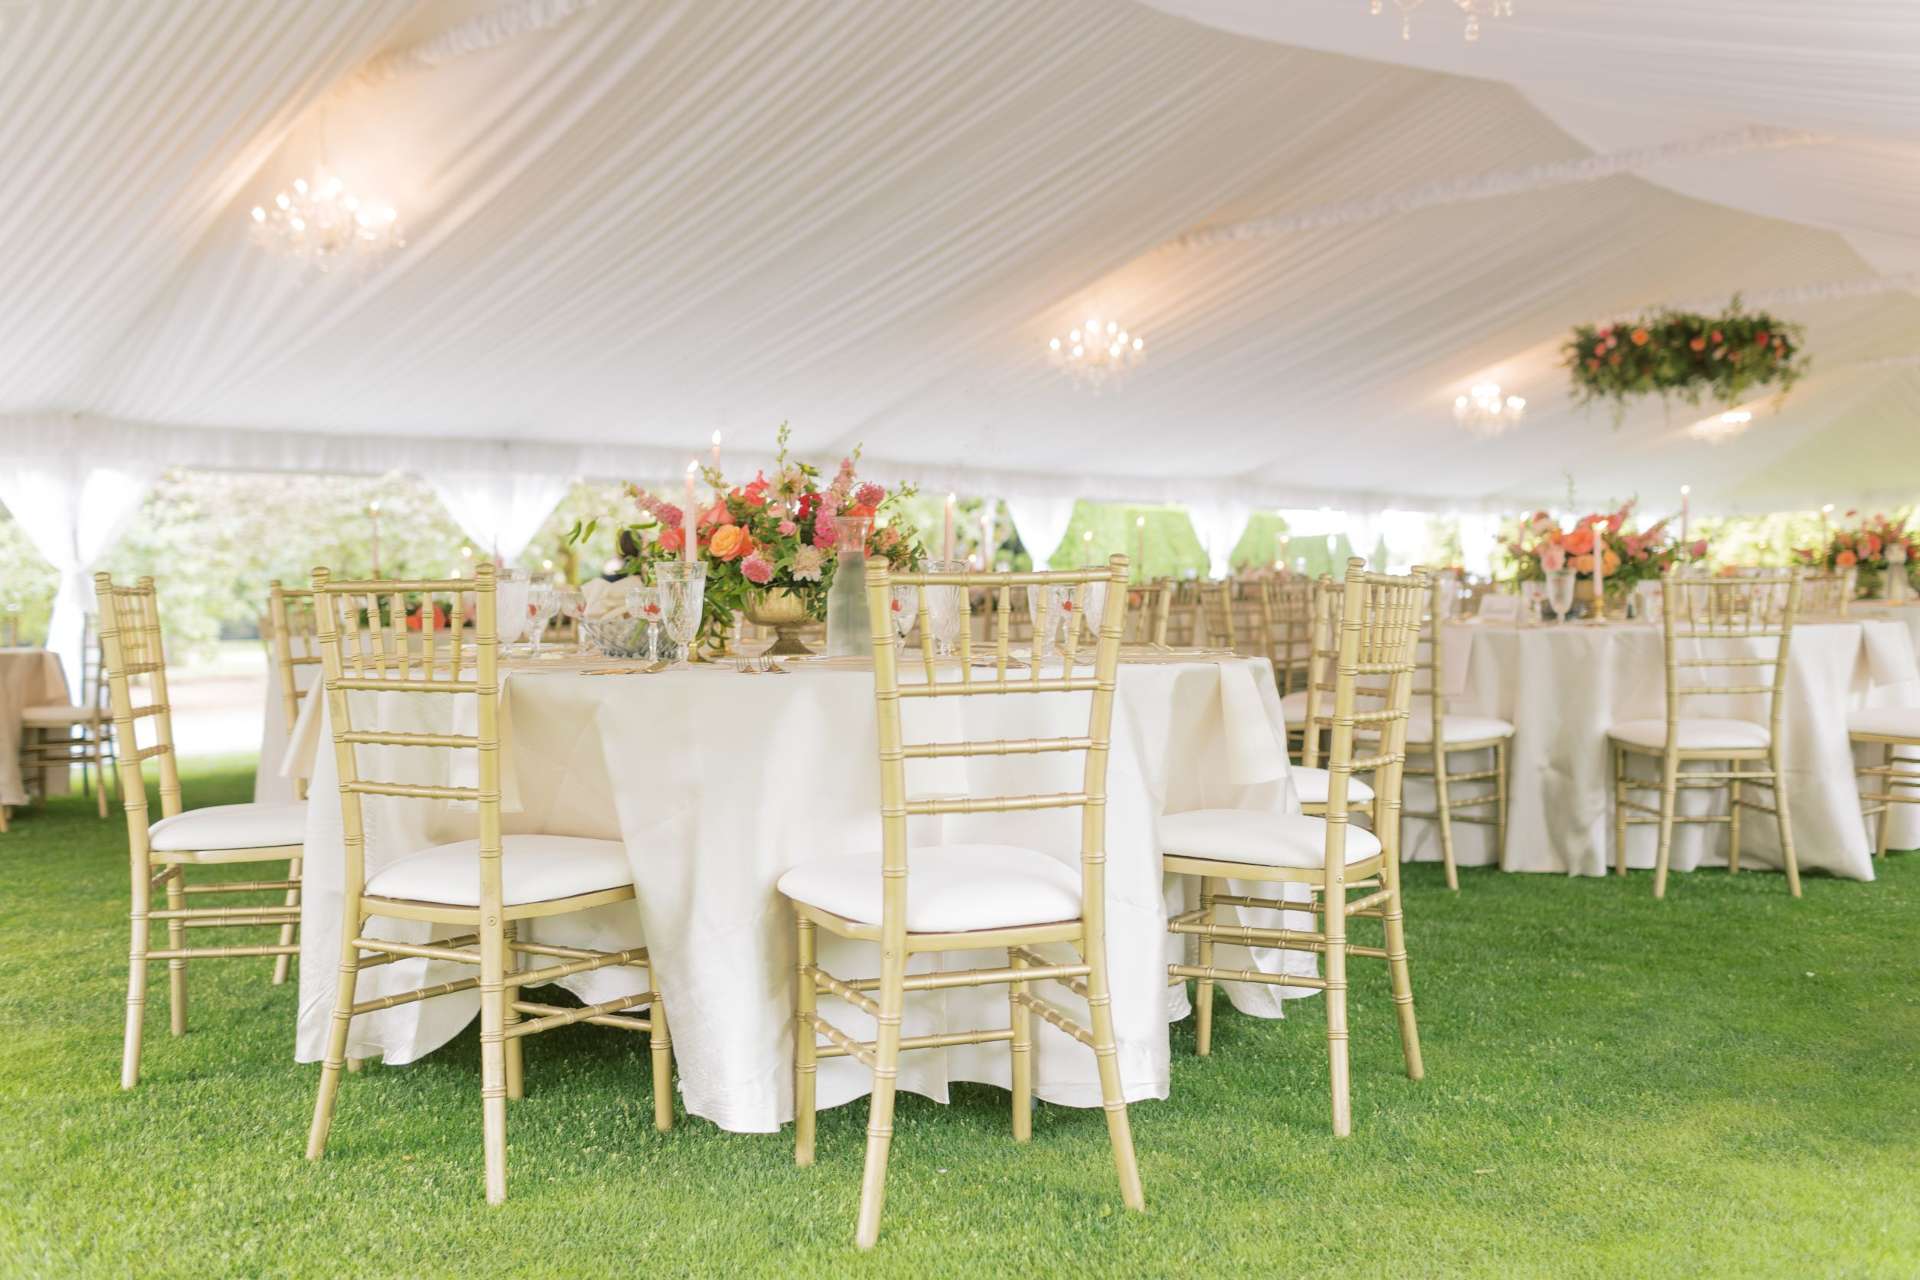 Wedding reception in White Tent with Gold Chiavari Chairs